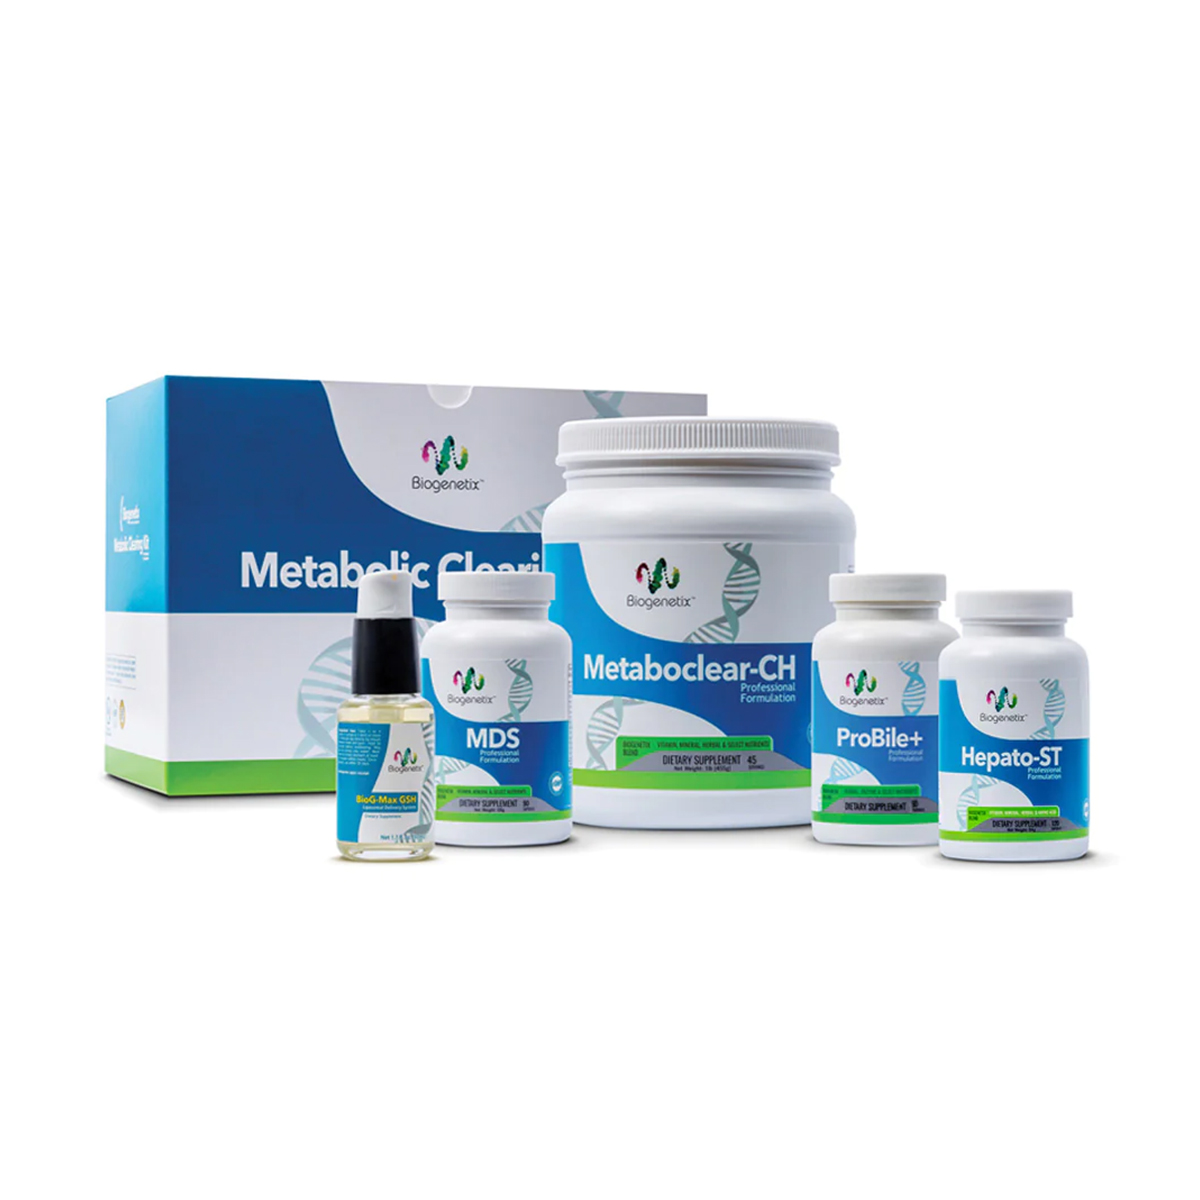 Metabolic Clearing Kit (Basic) with Hepato-ST